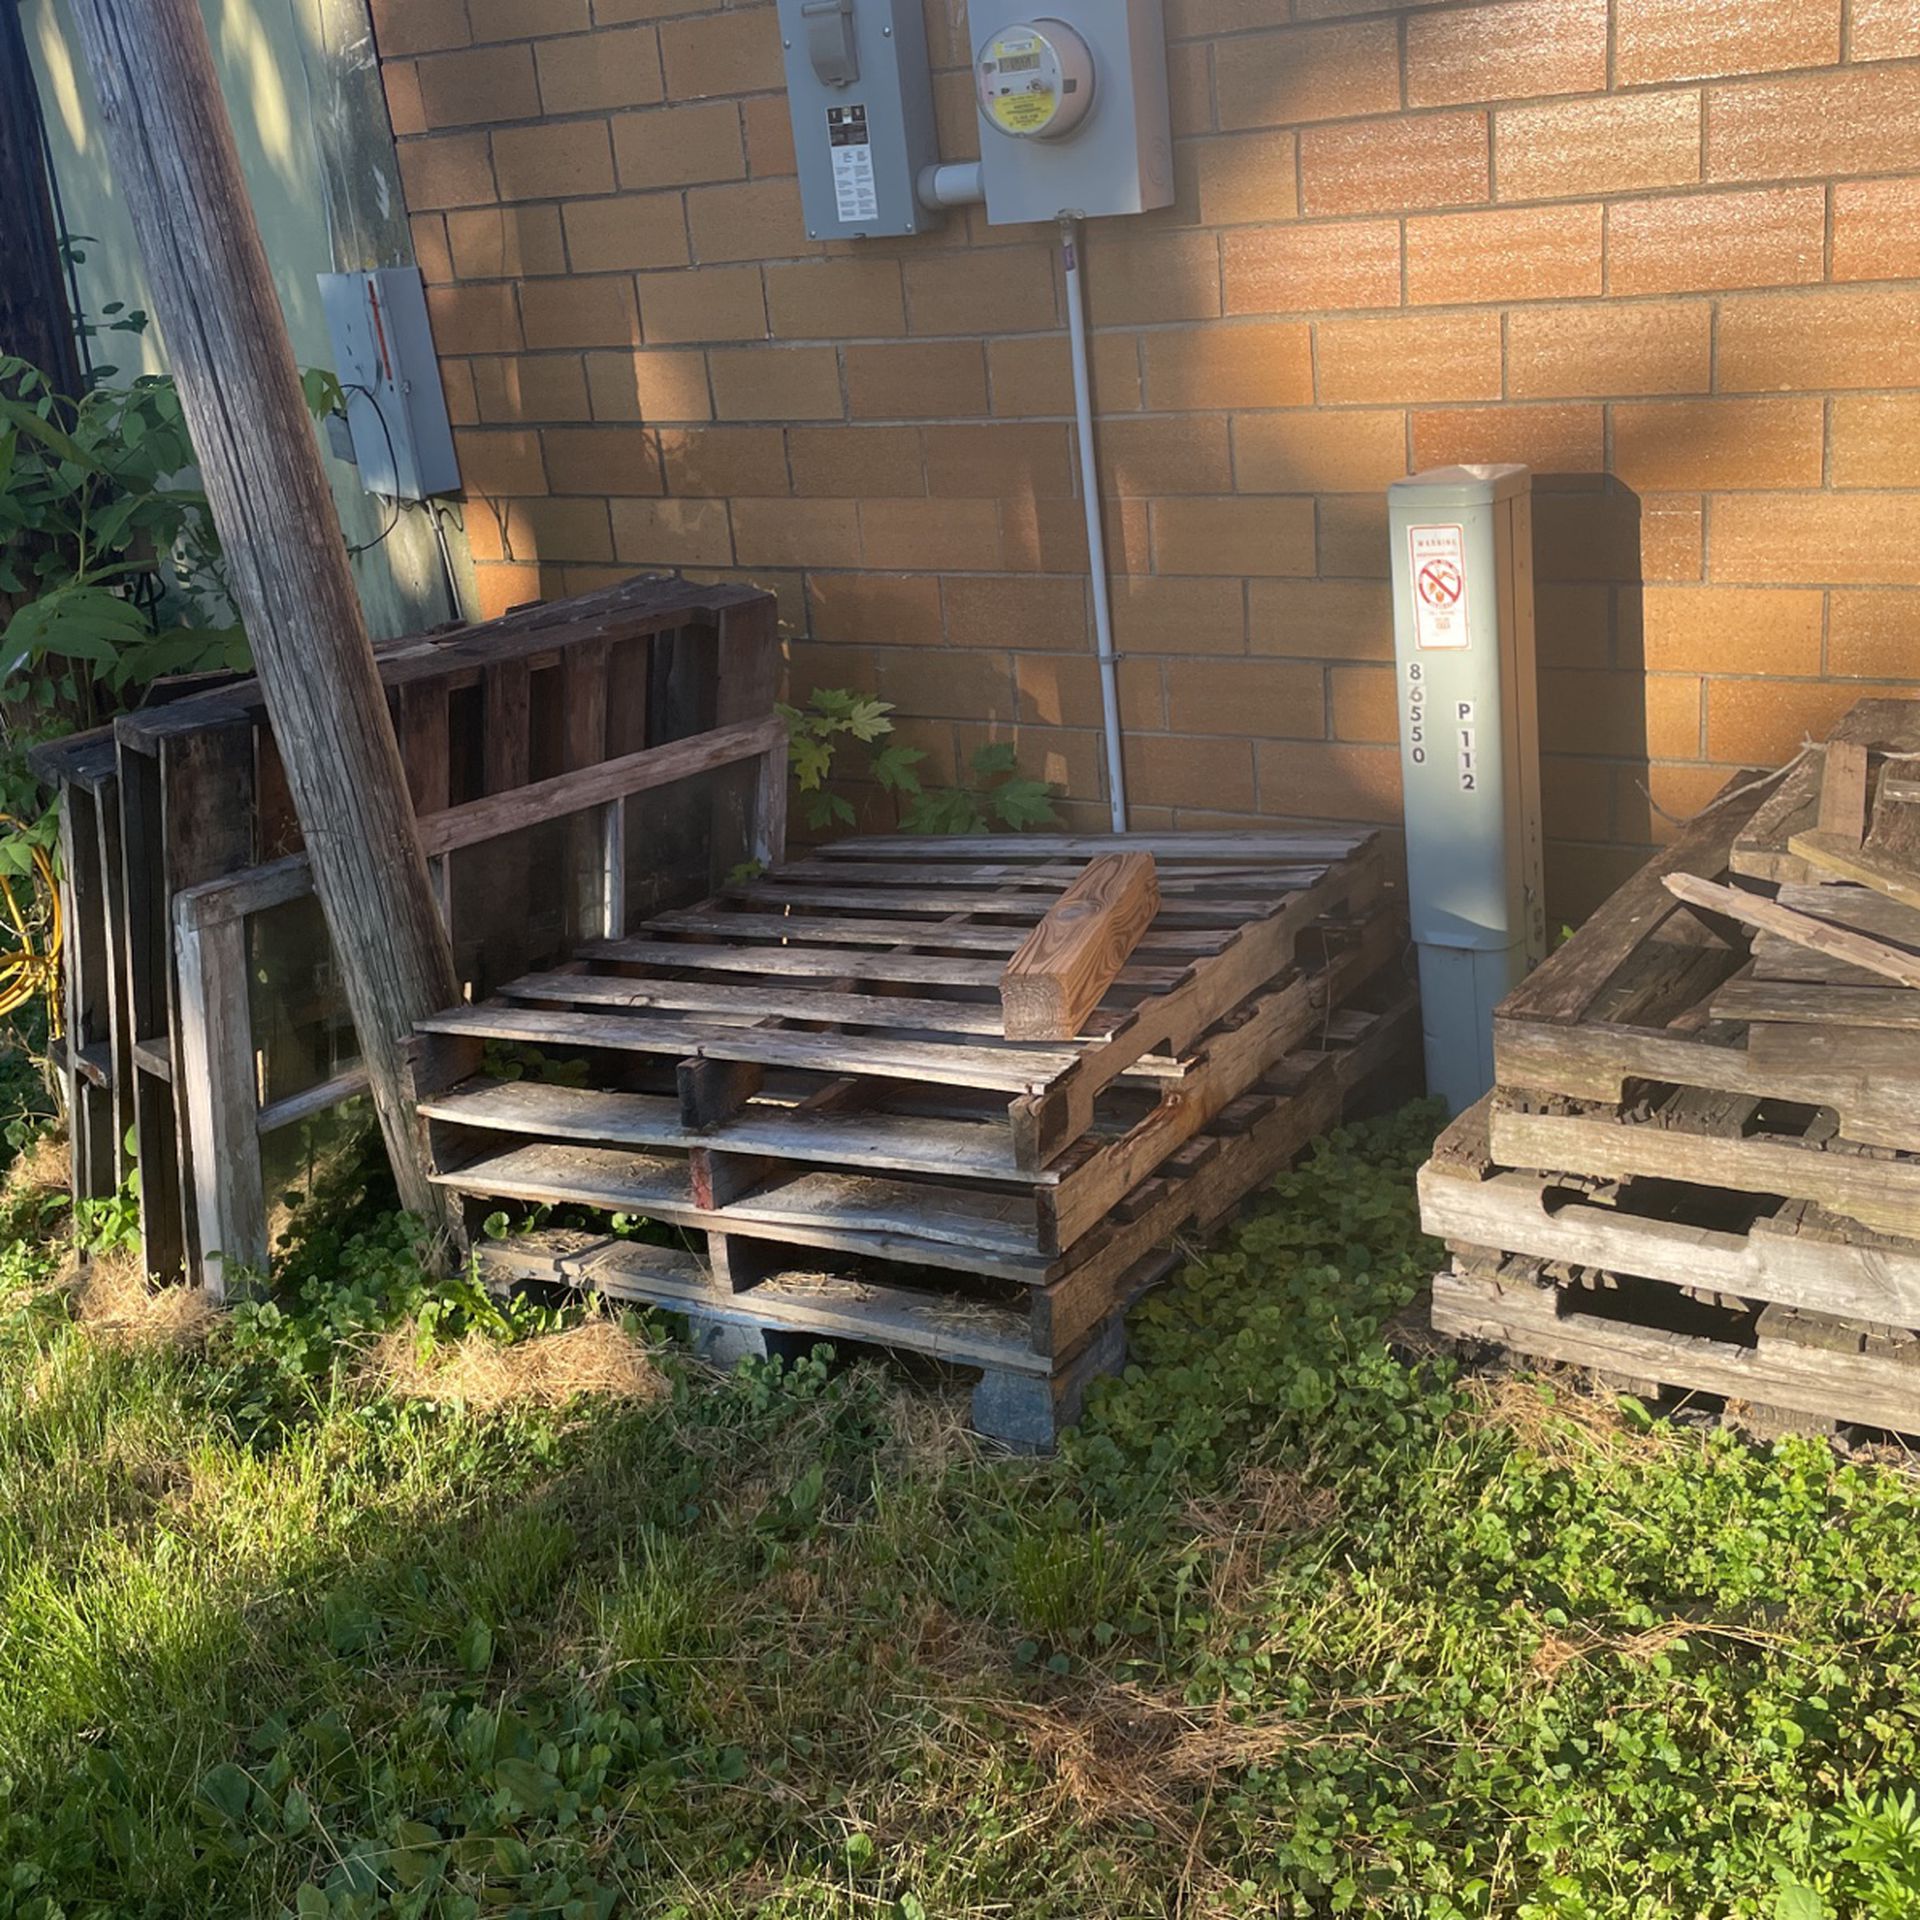 Free FRee FREe FREE Pallets!!! Stop By And Take It! 